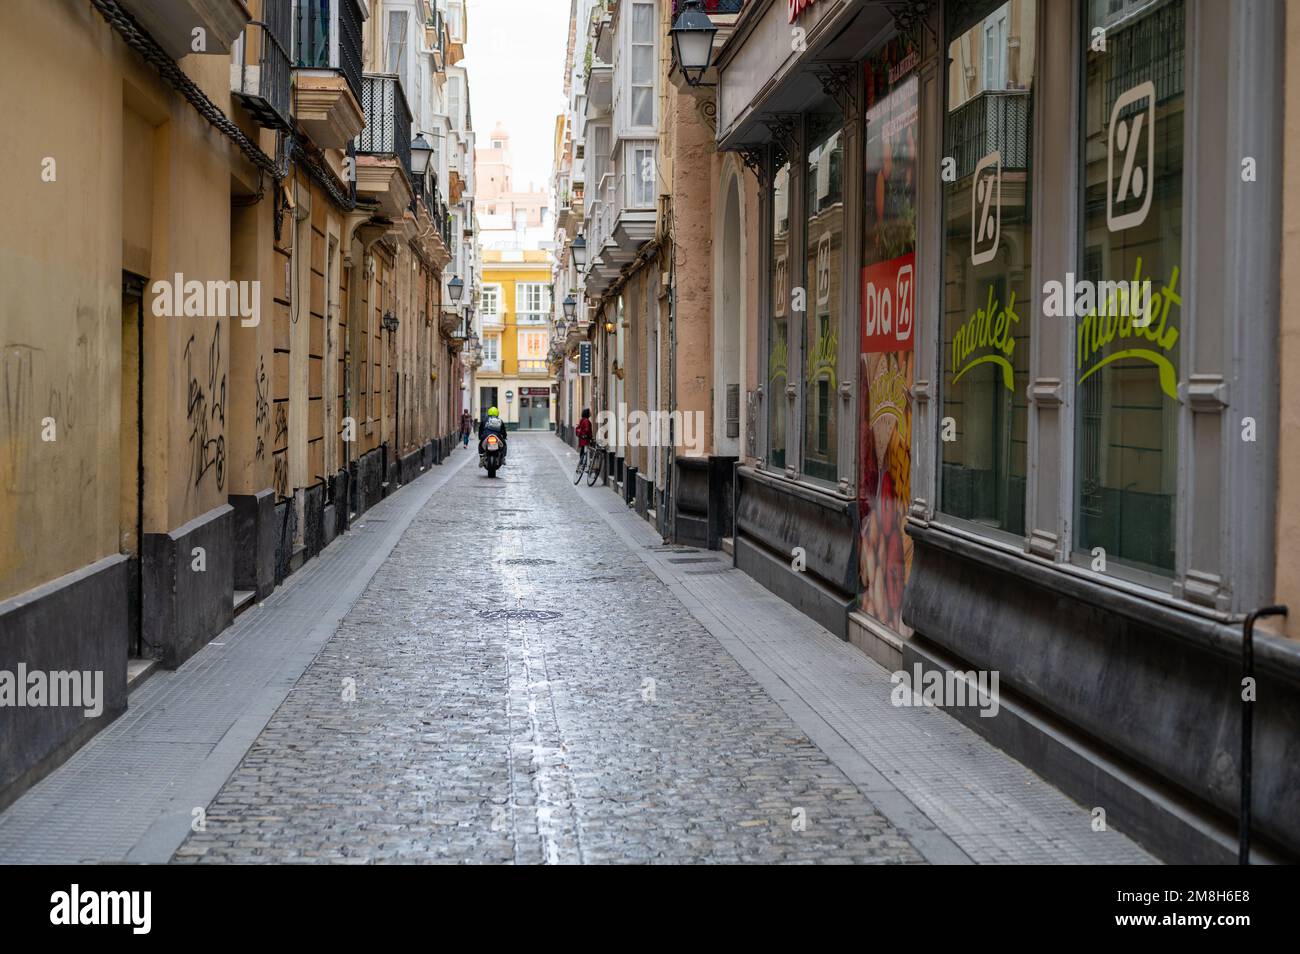 A narrow street in the city of Cadiz Spain with cobbles and shops Stock Photo